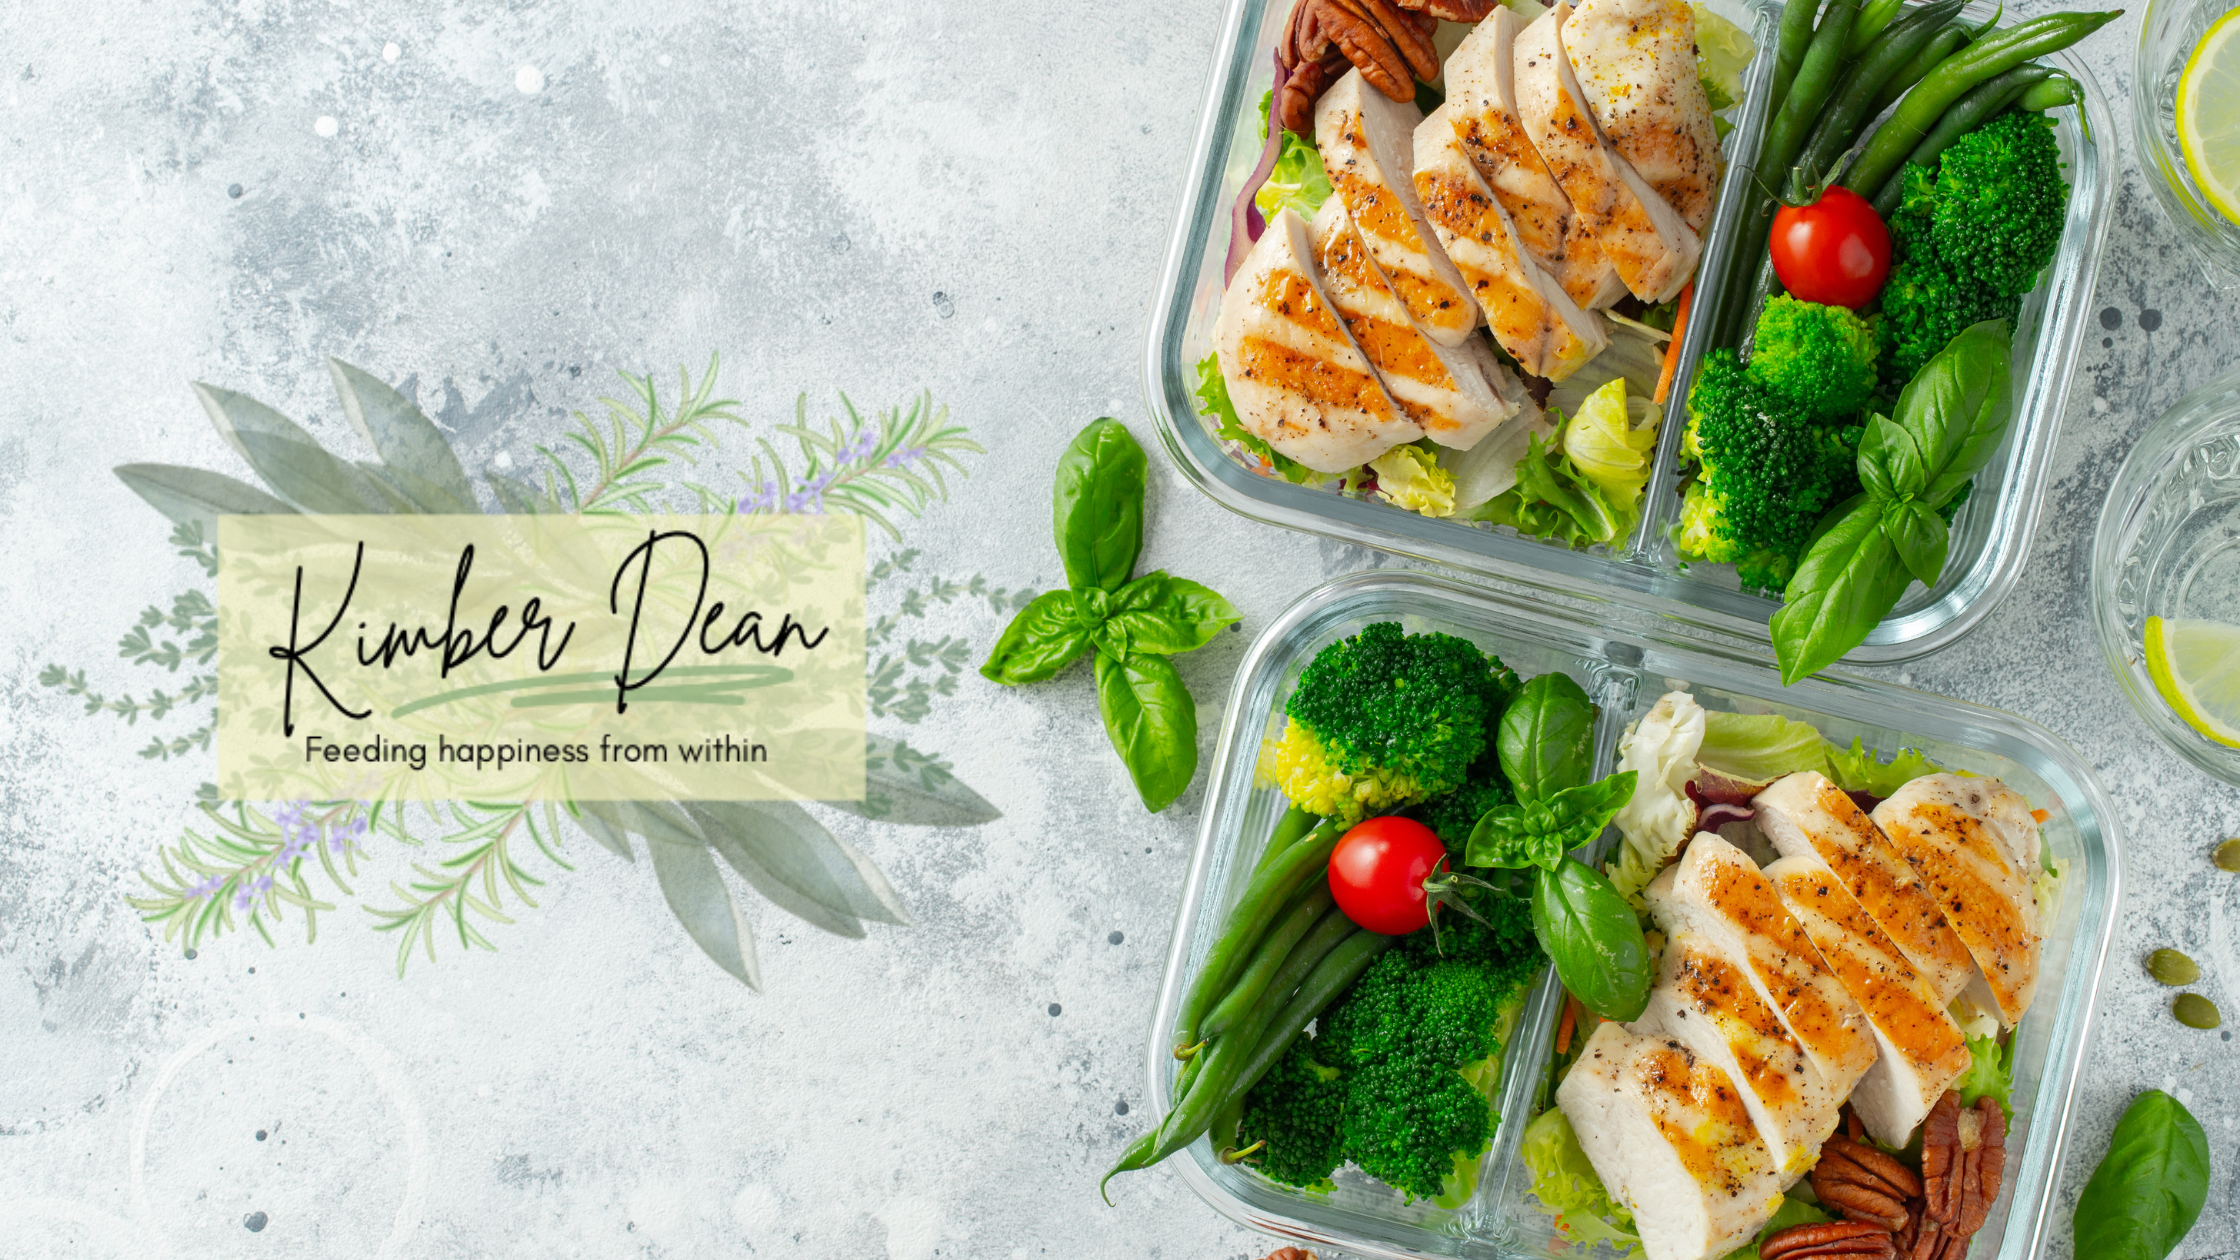 Nourishing Your Week: A Guide to Sustainable Meal Prep with Seasonal Delights